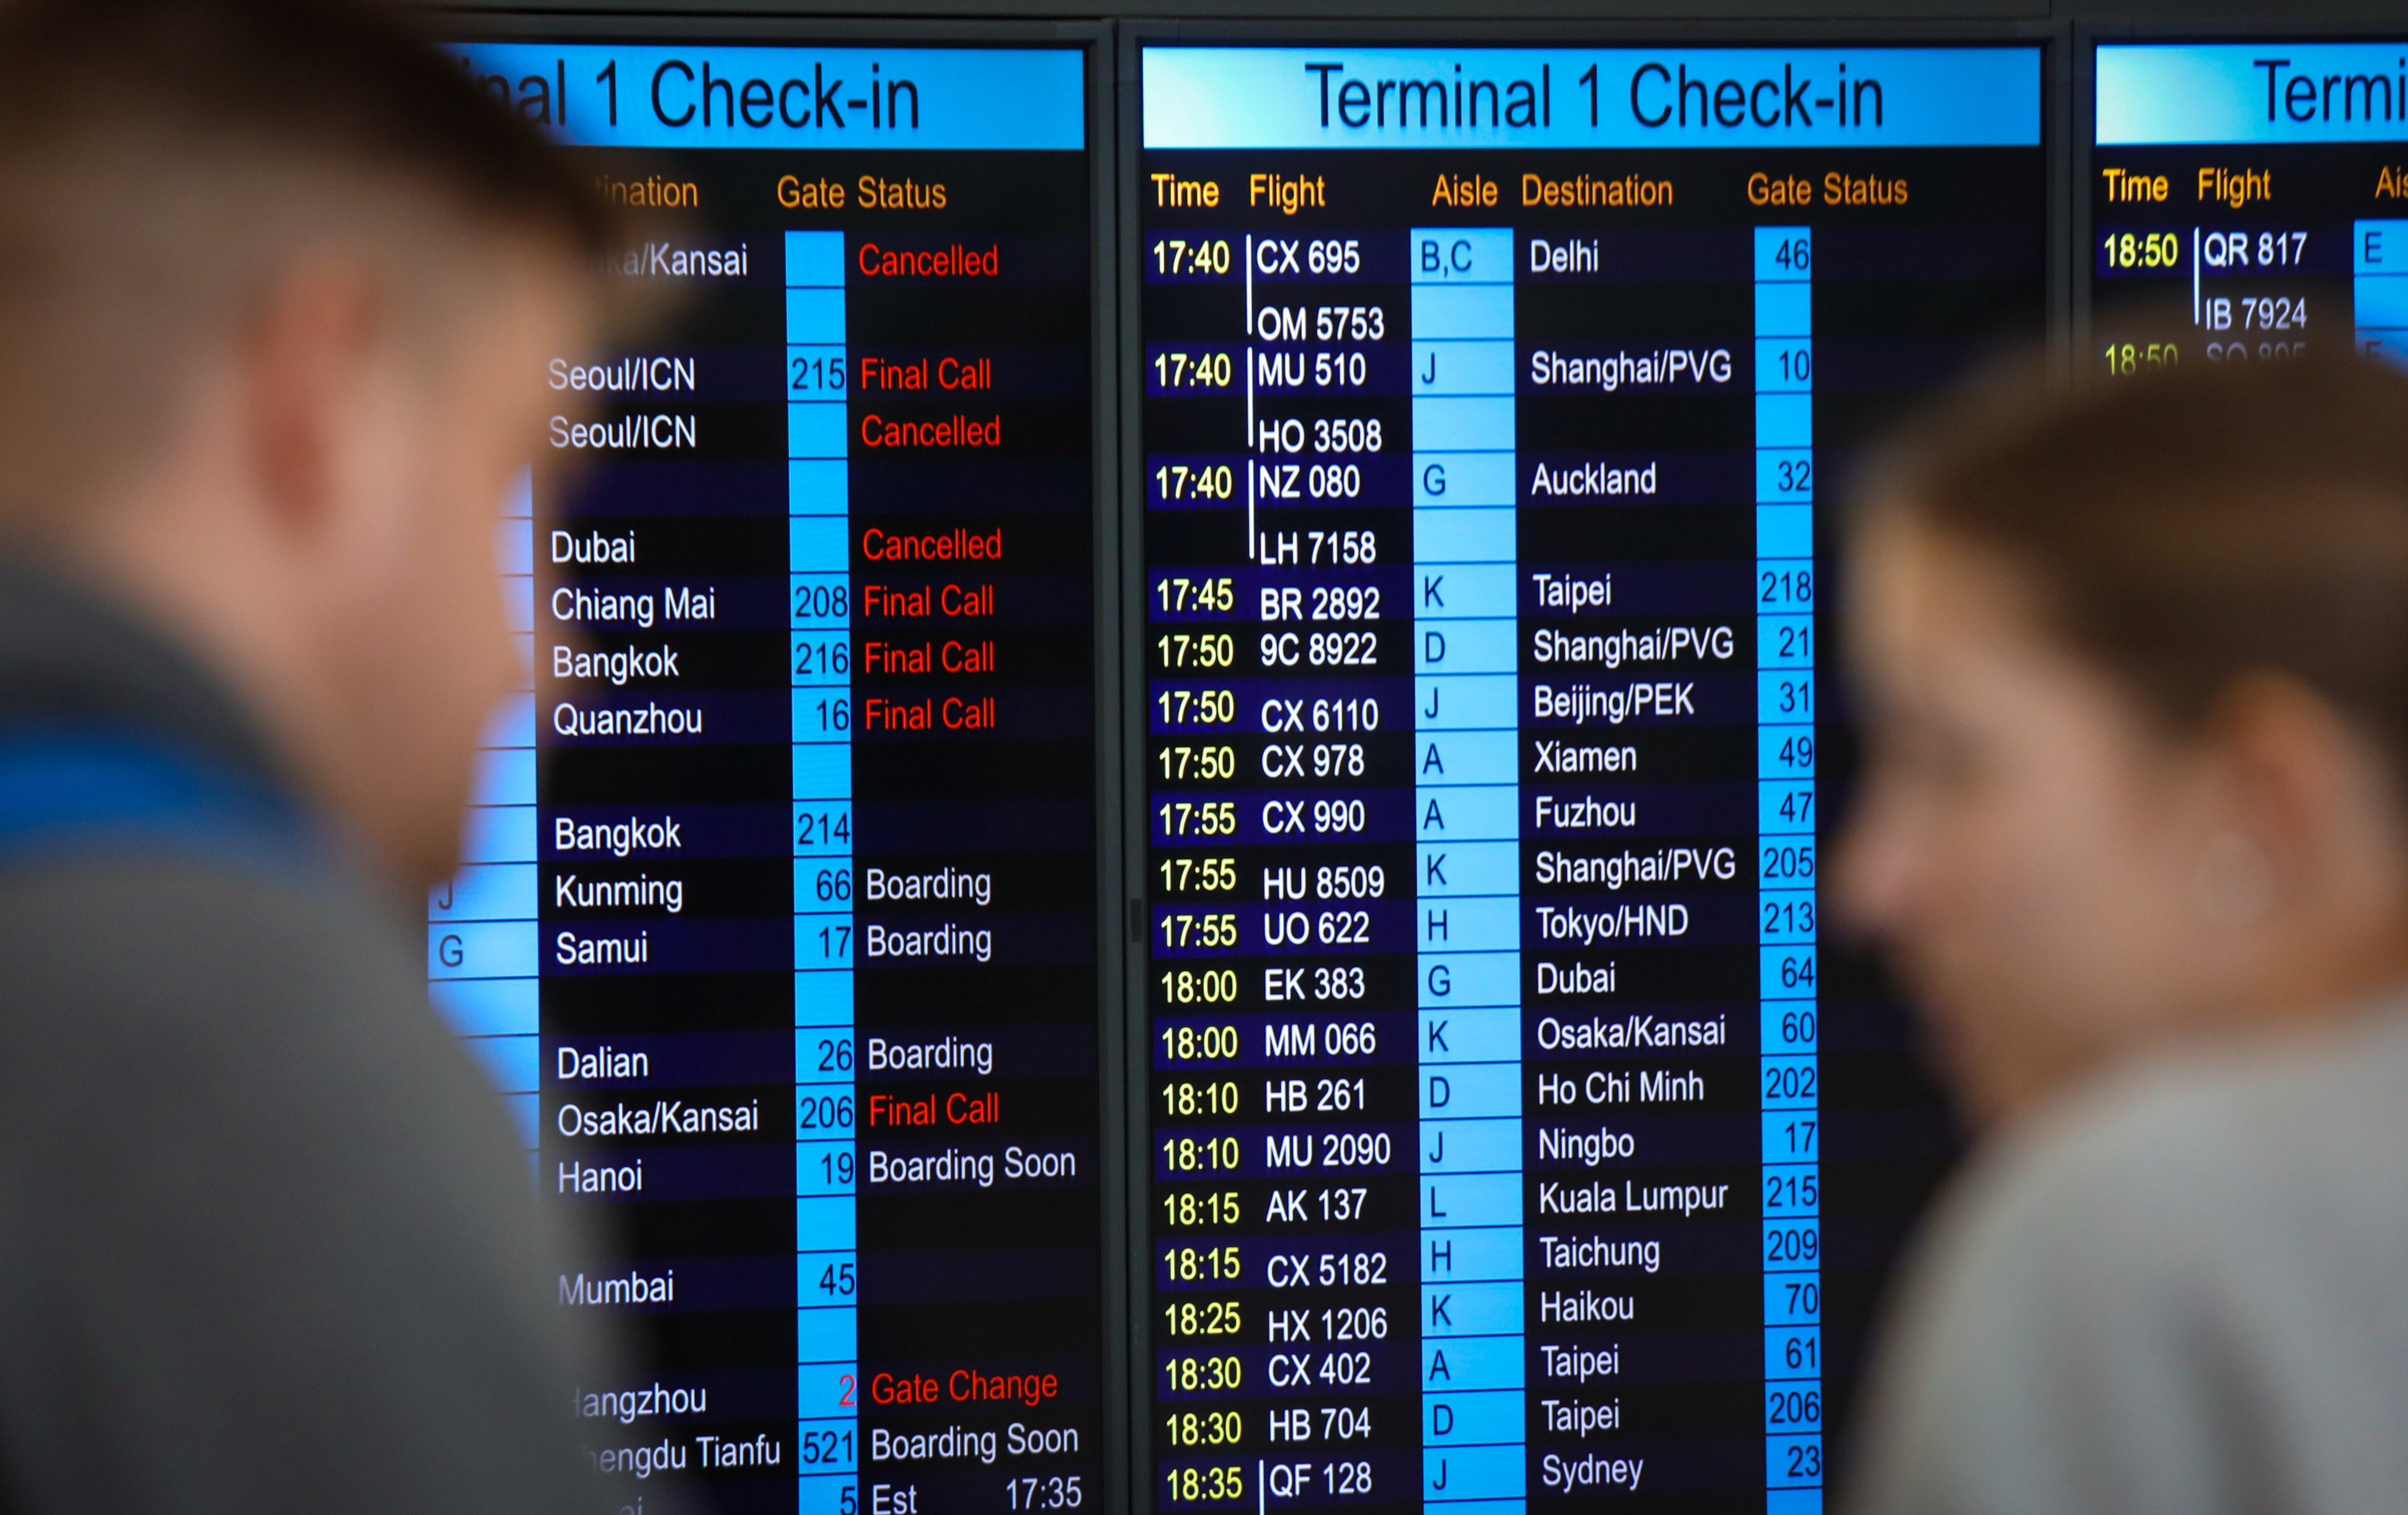 Passengers check flight information at Hong Kong International Airport, Chek Lap Kok. Cathay Pacific has promised better performance in the wake of a spate of flight cancellations. Photo: Xiaomei Chen